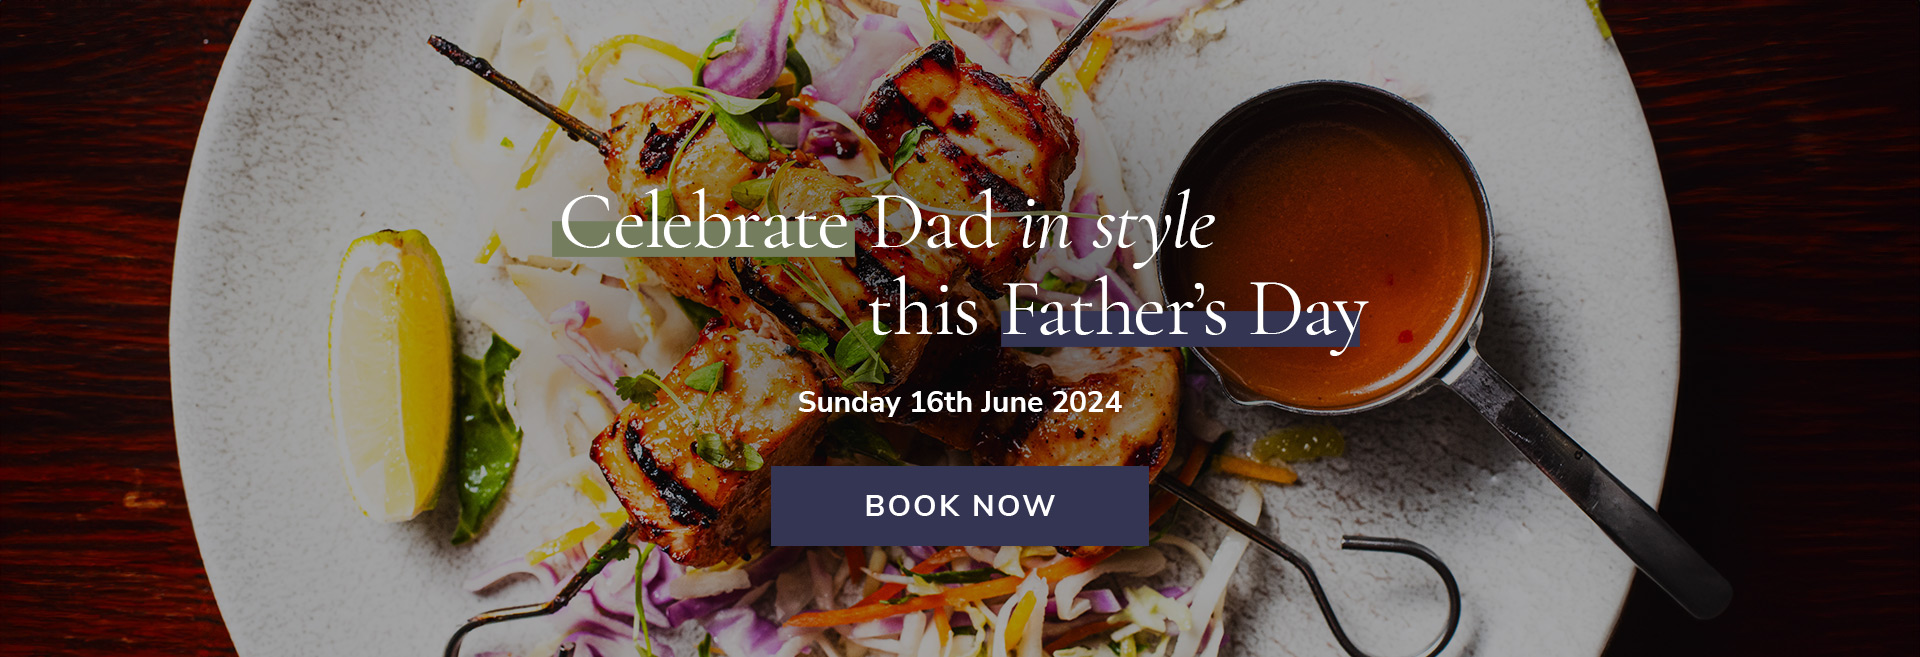 Father's Day at The Devonshire Arms